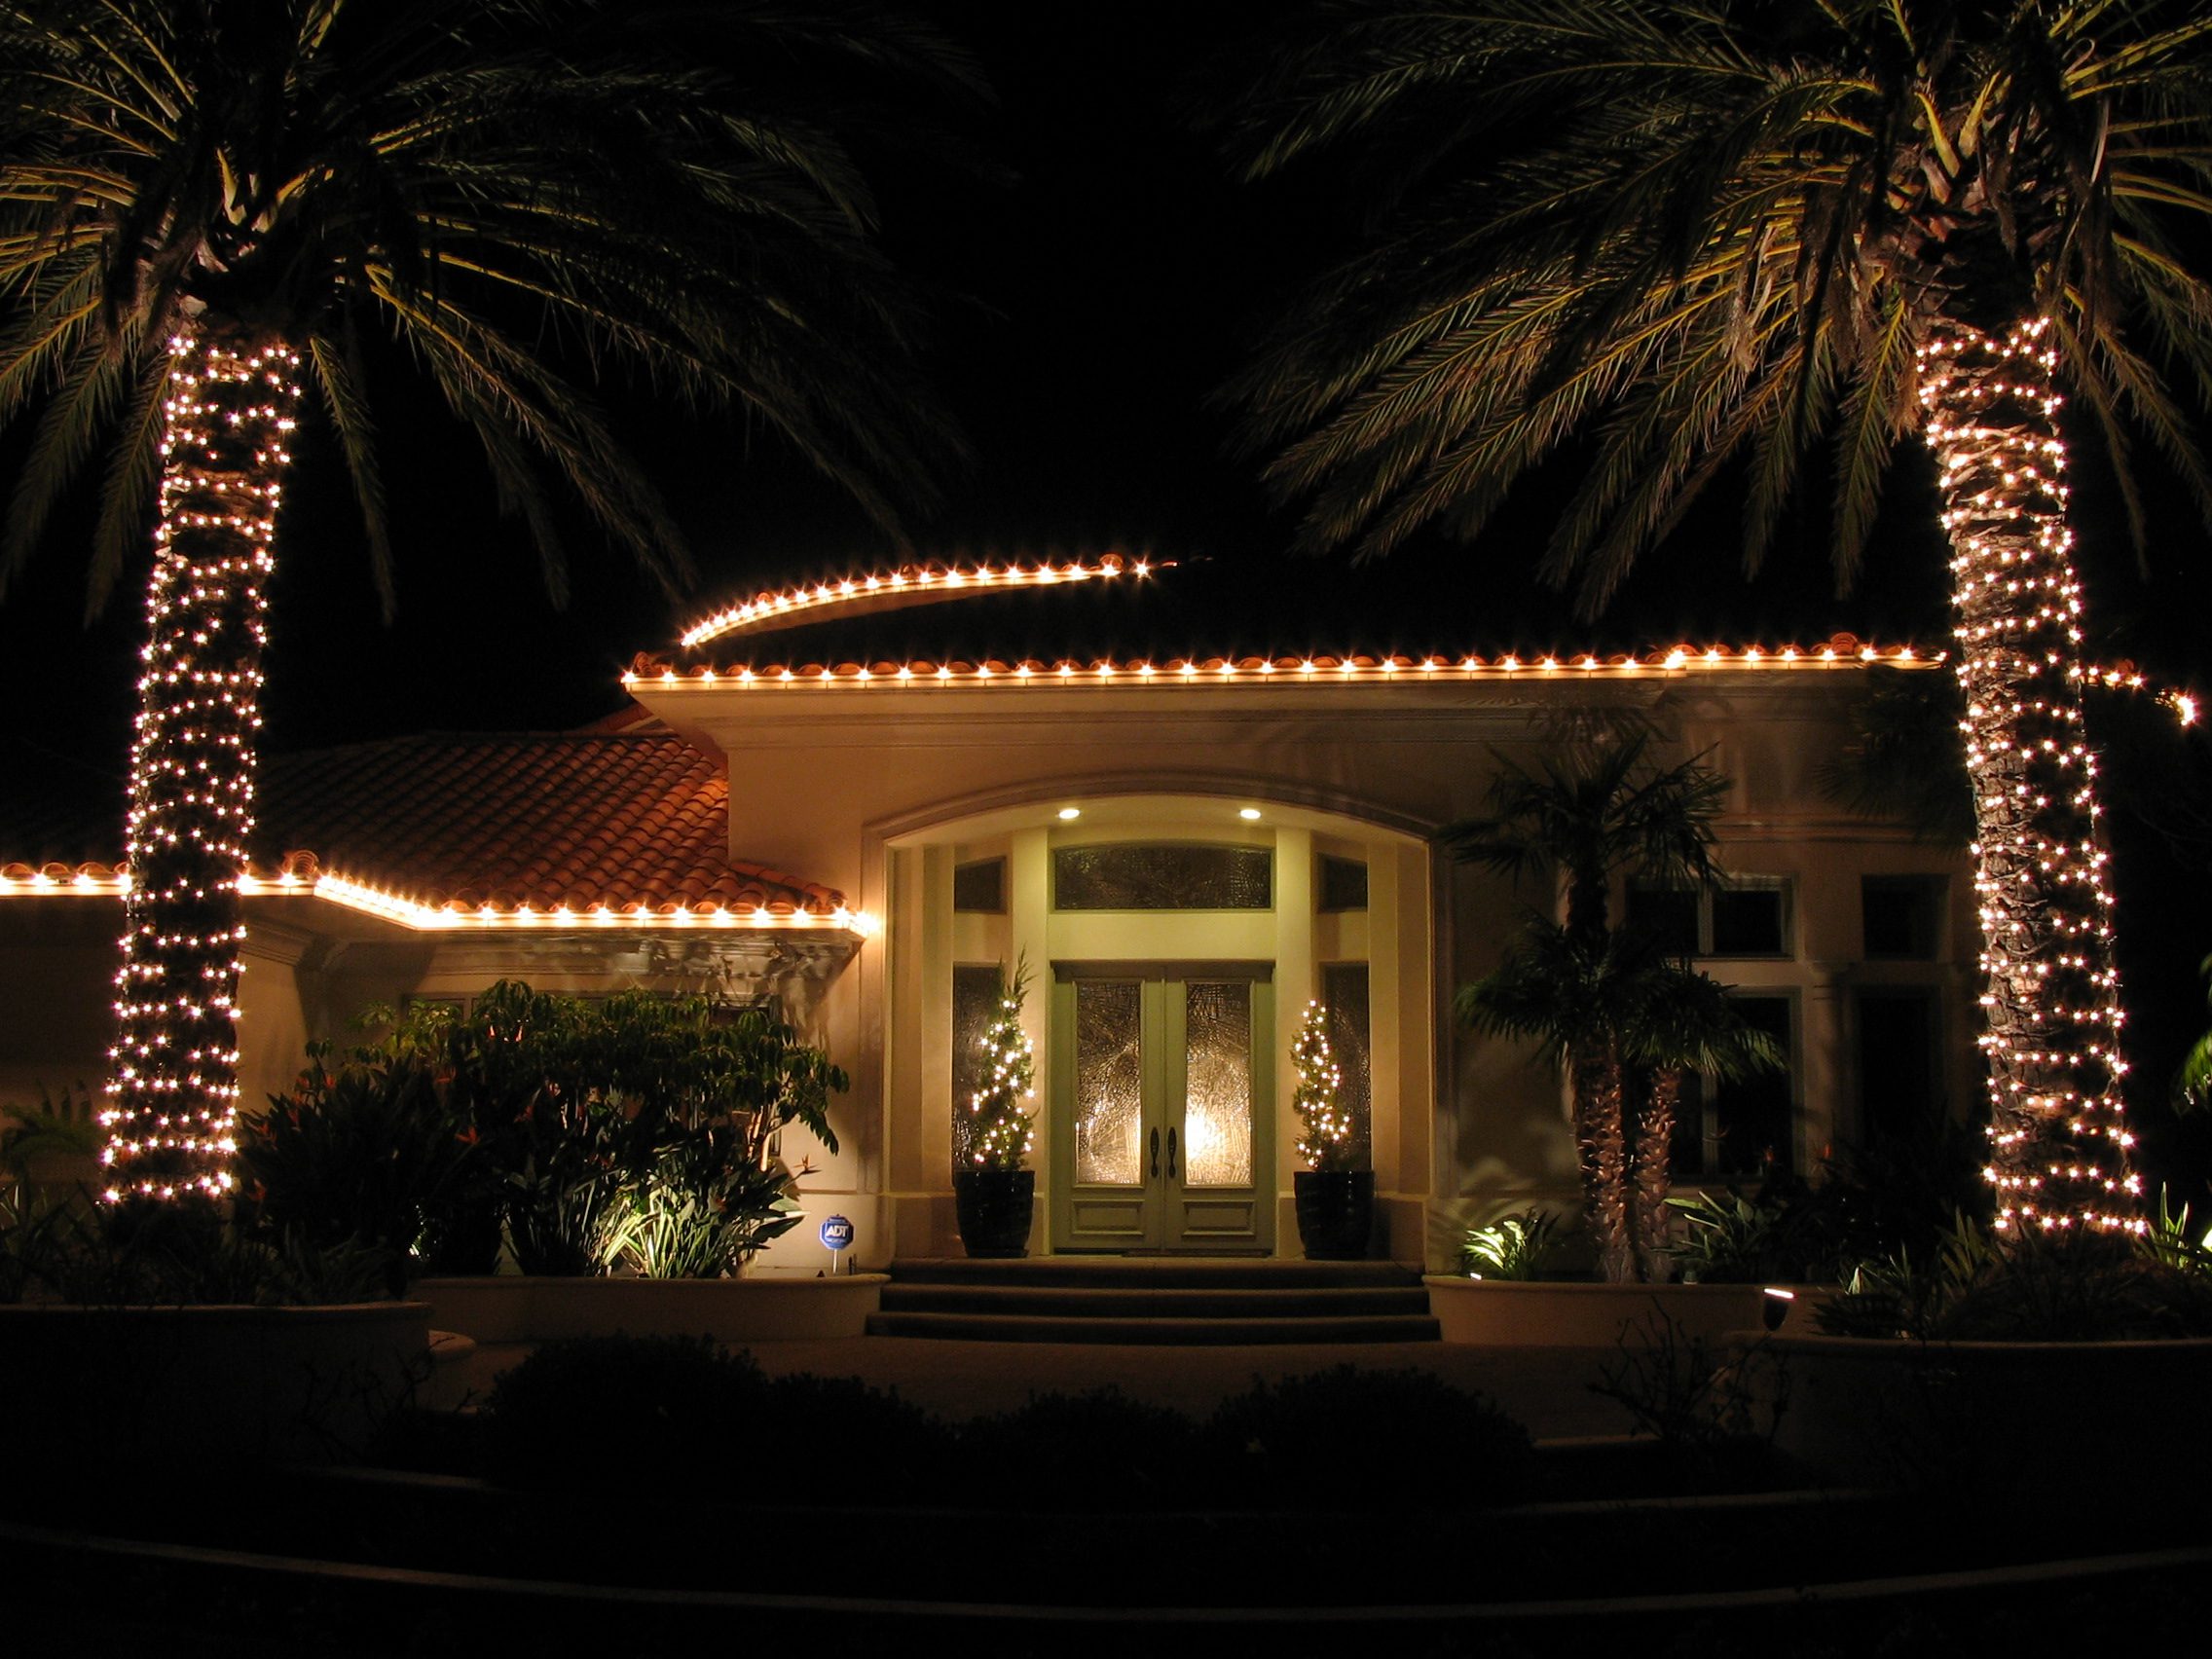 Home and Palm Trees decorated with Professional Christmas Lighting